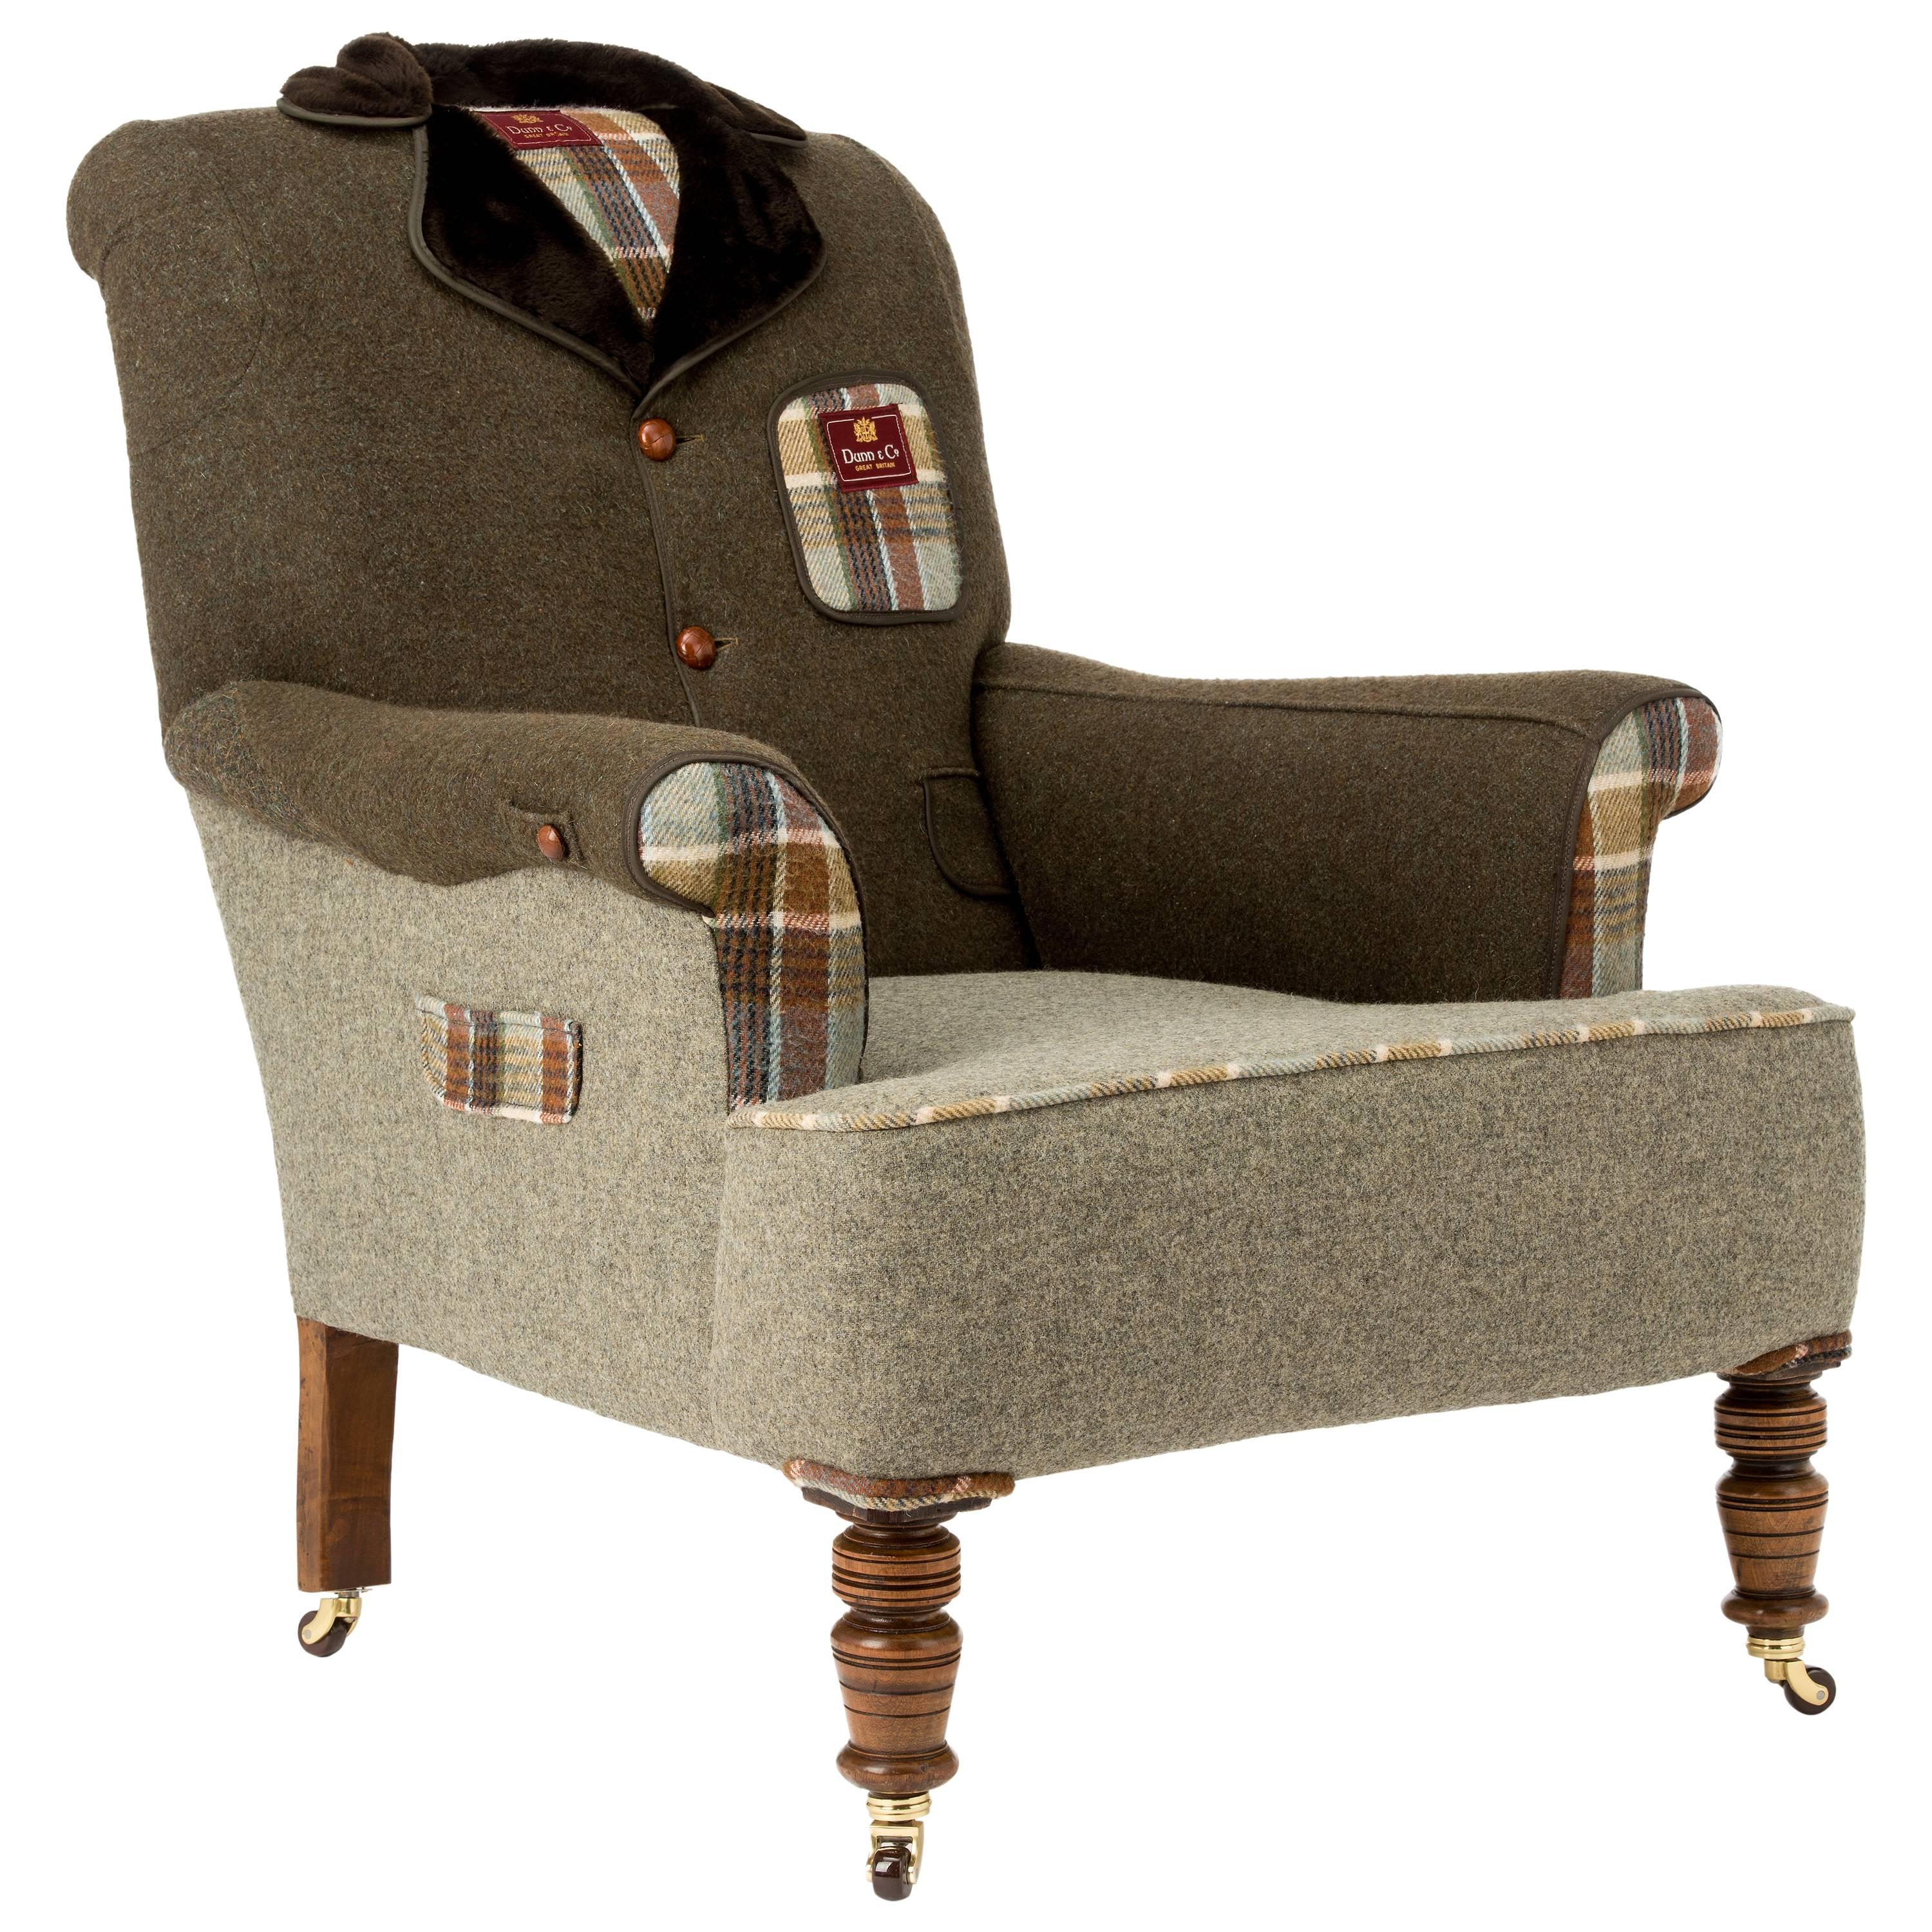 The Country Tweed Armchair. For Sale